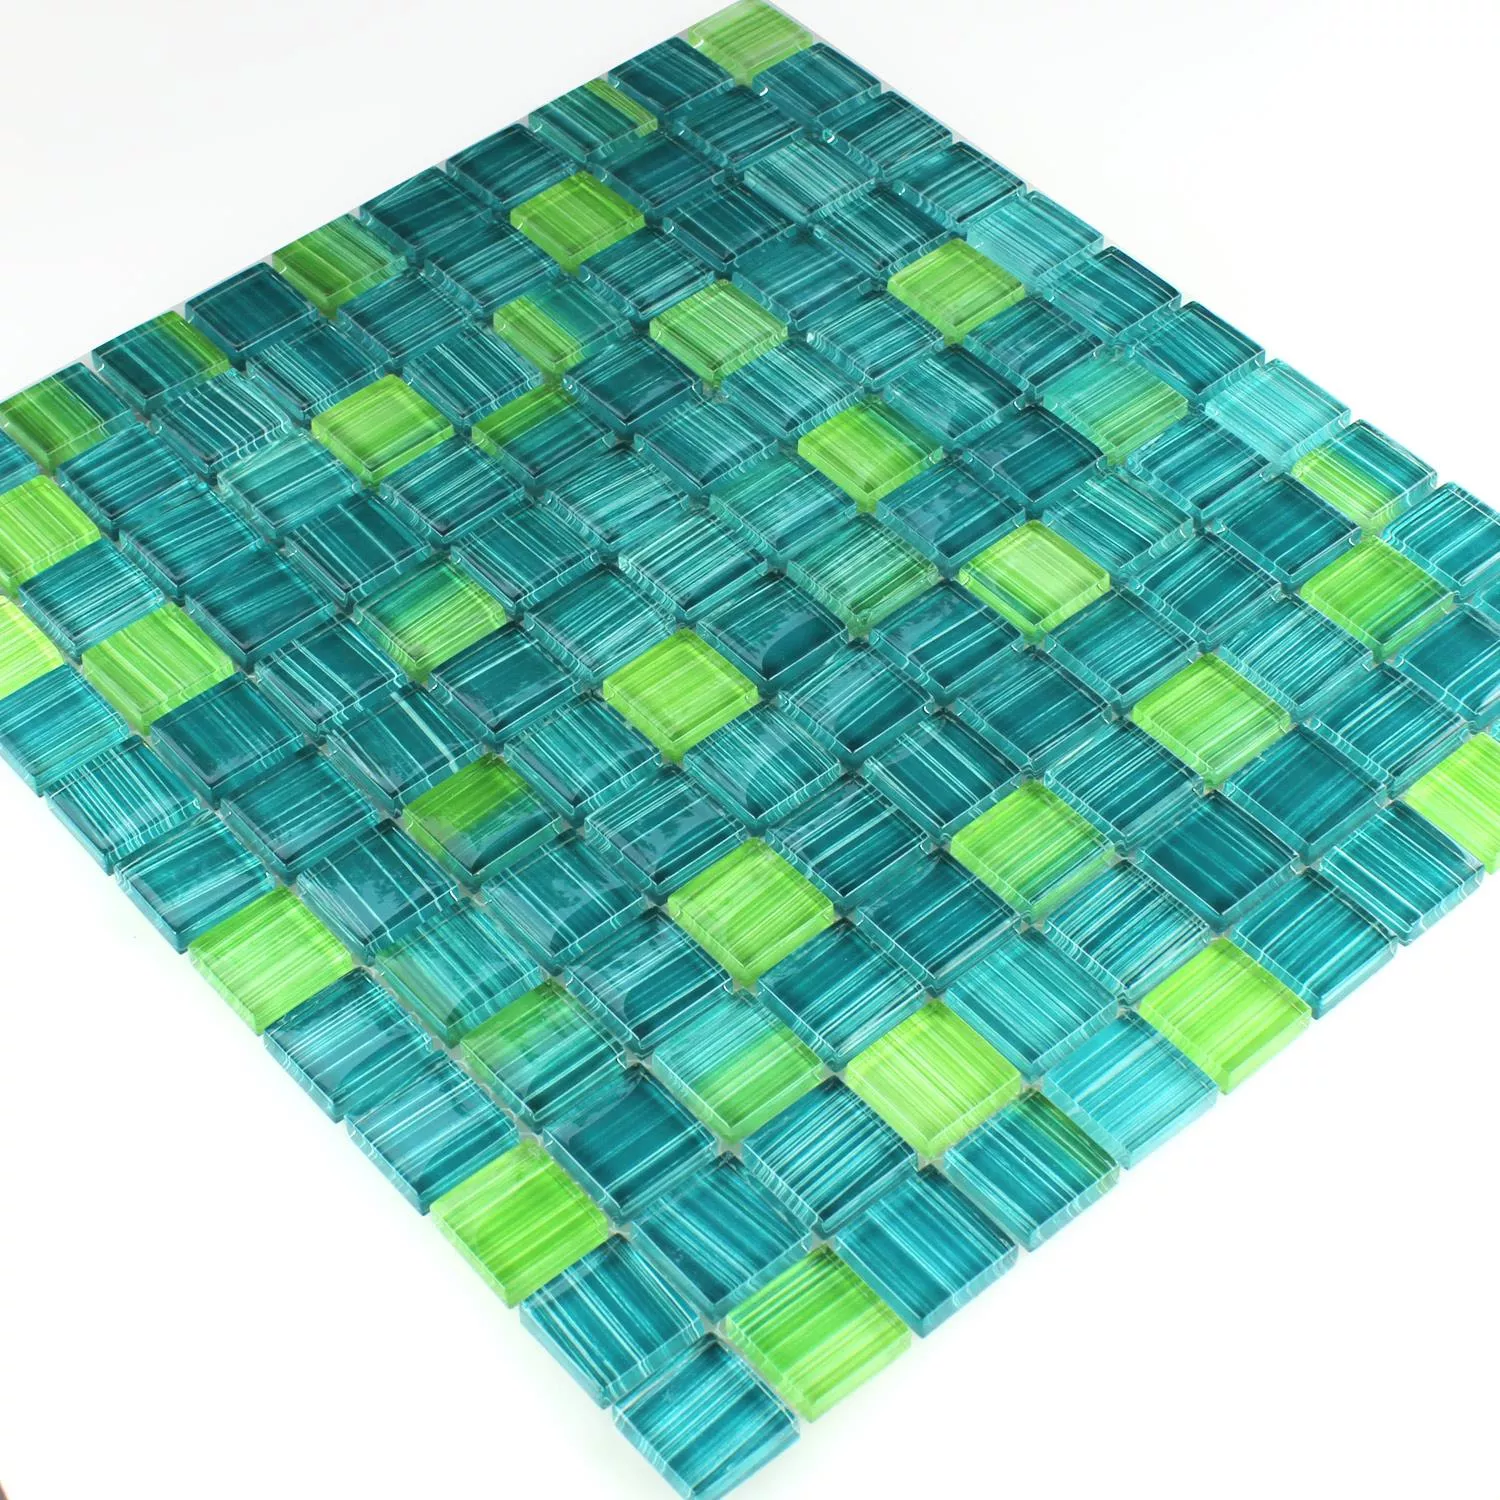 Sample Striped Crystal Mosaic Tiles Glass Green